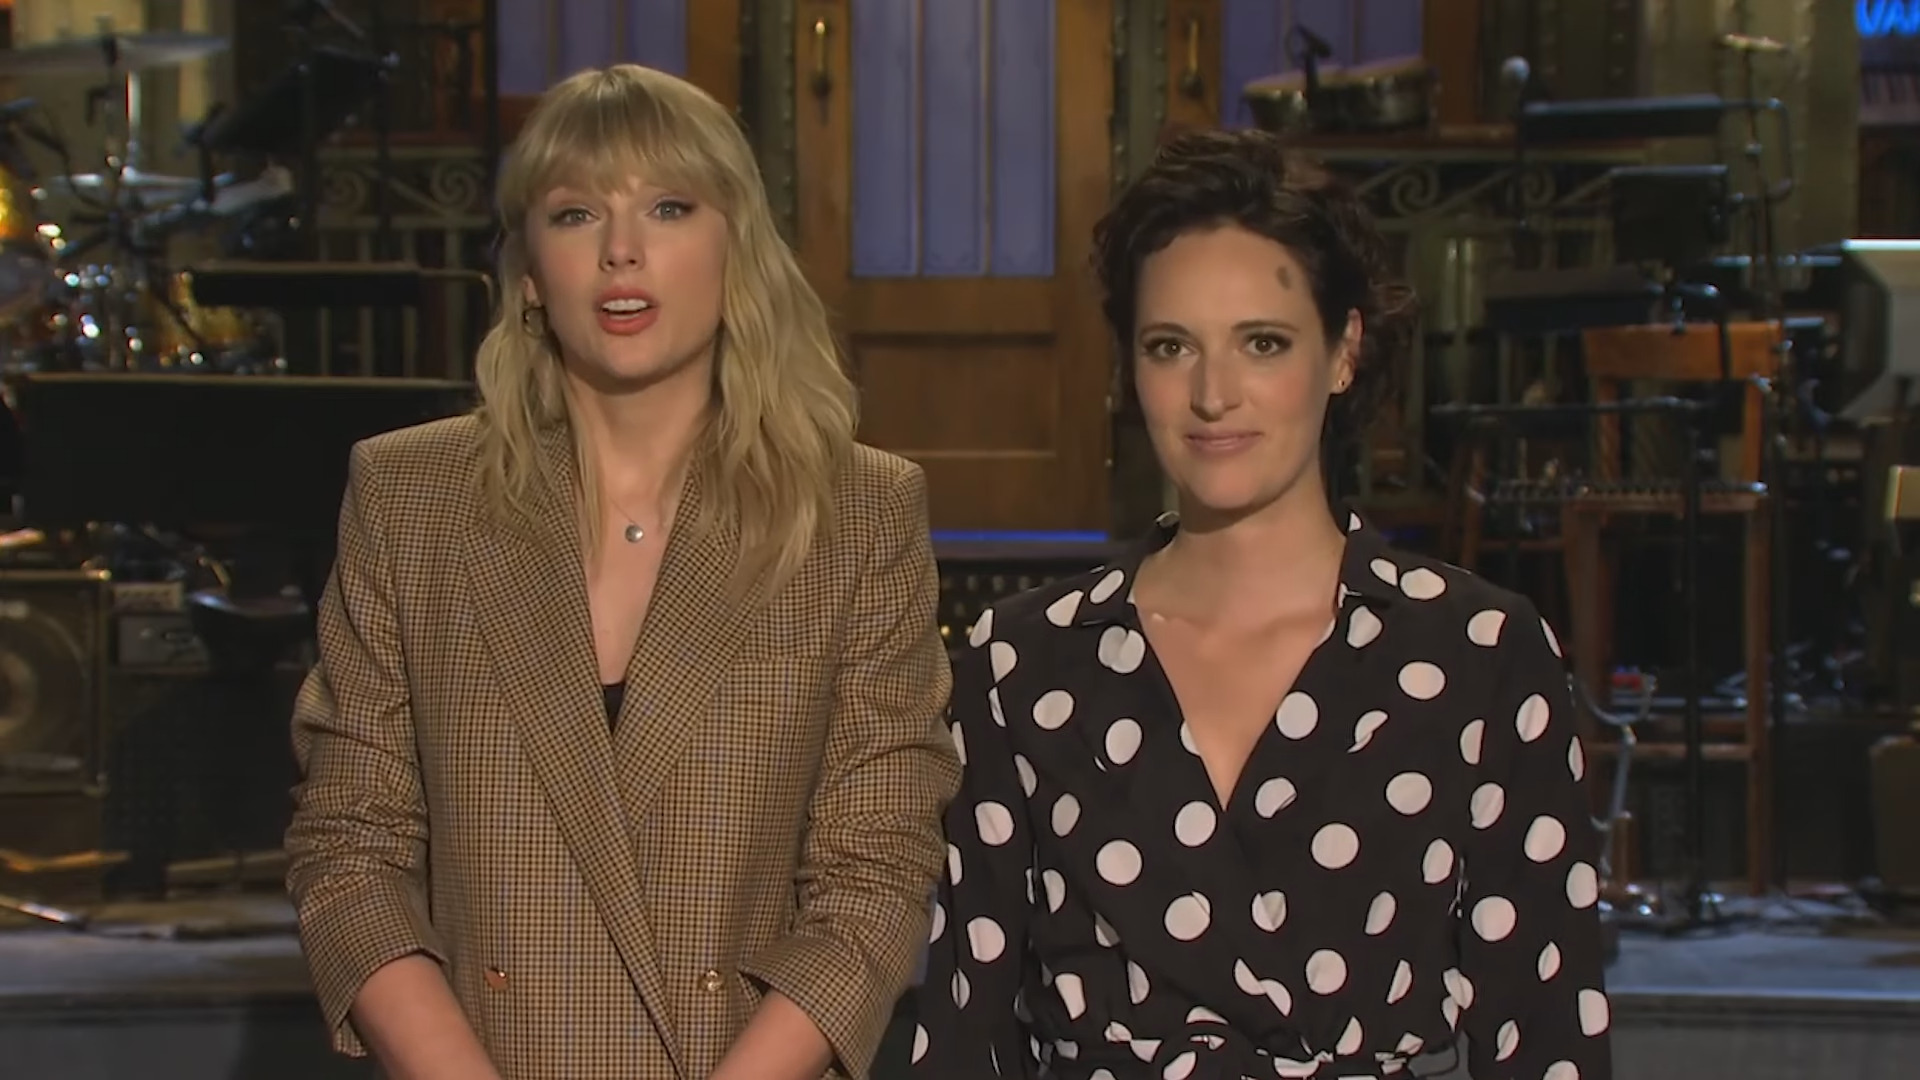 Taylor Swift and Phoebe Waller-Bridge host the second episode of SNL's 45th season